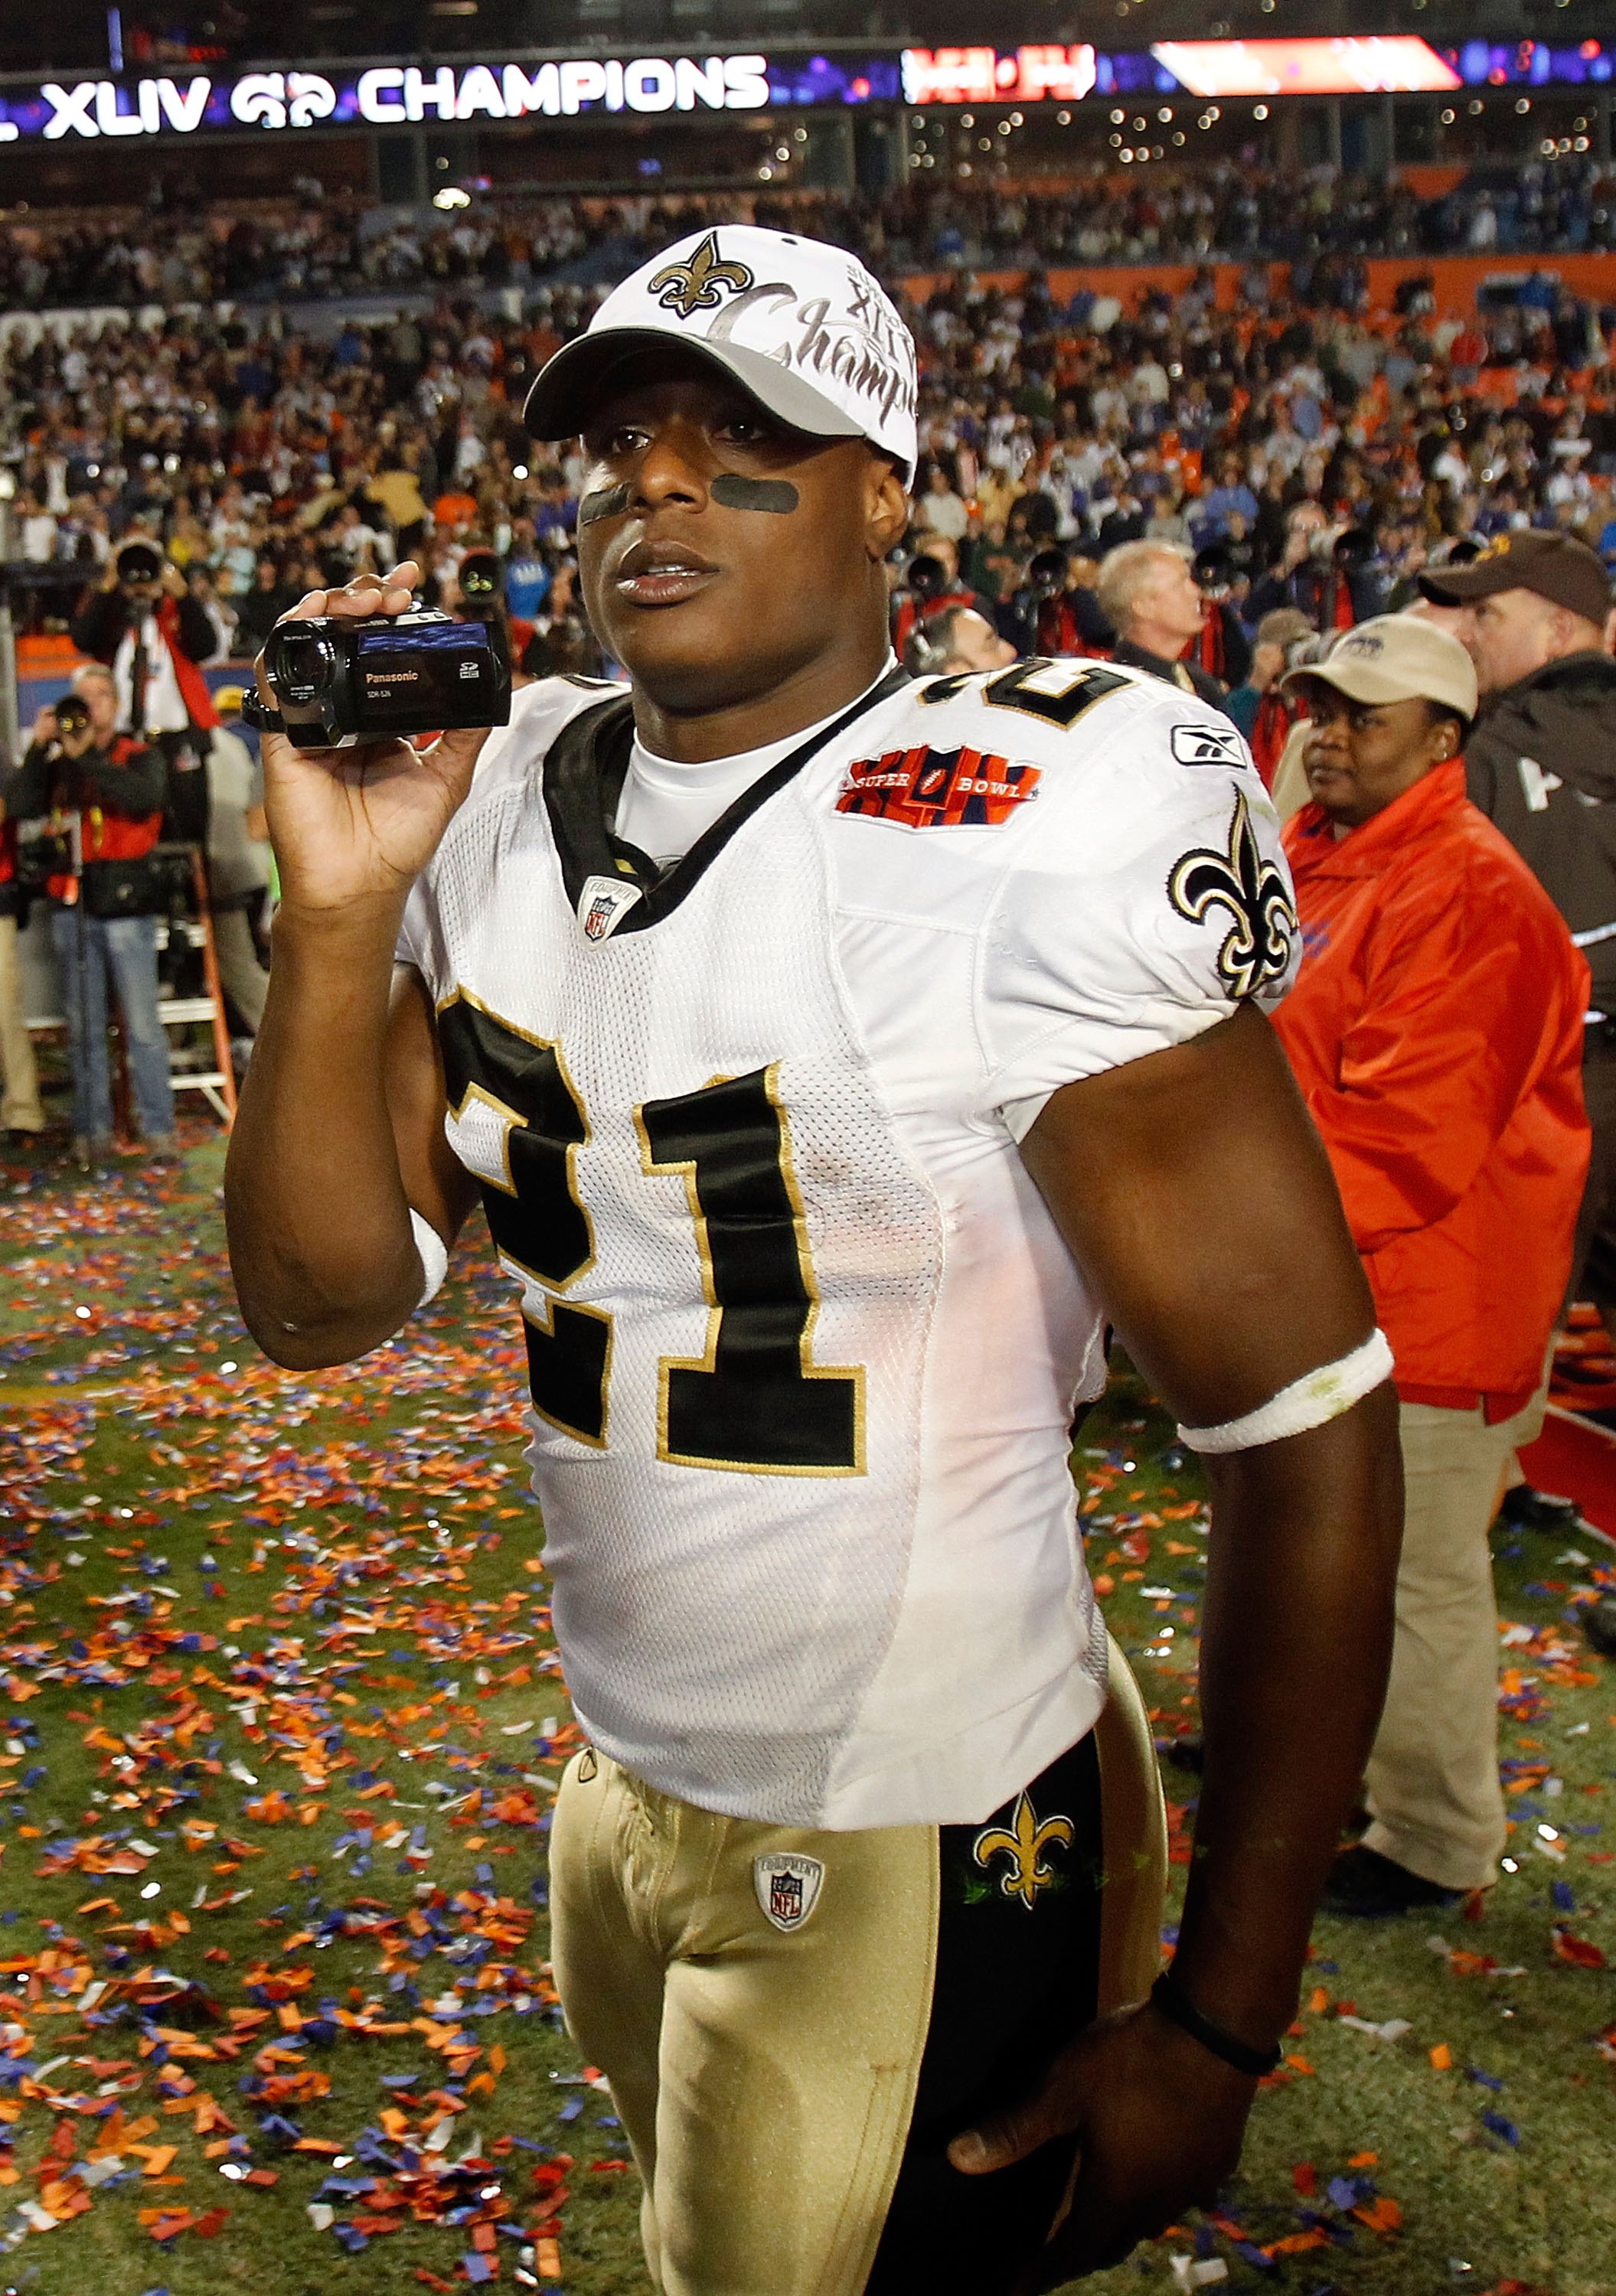 MIAMI GARDENS, FL - FEBRUARY 07:  Mike Bell #21 of the New Orleans Saints video tapes on the field after his team defeated the Indianapolis Colts during Super Bowl XLIV on February 7, 2010 at Sun Life Stadium in Miami Gardens, Florida.  (Photo by Jonathan